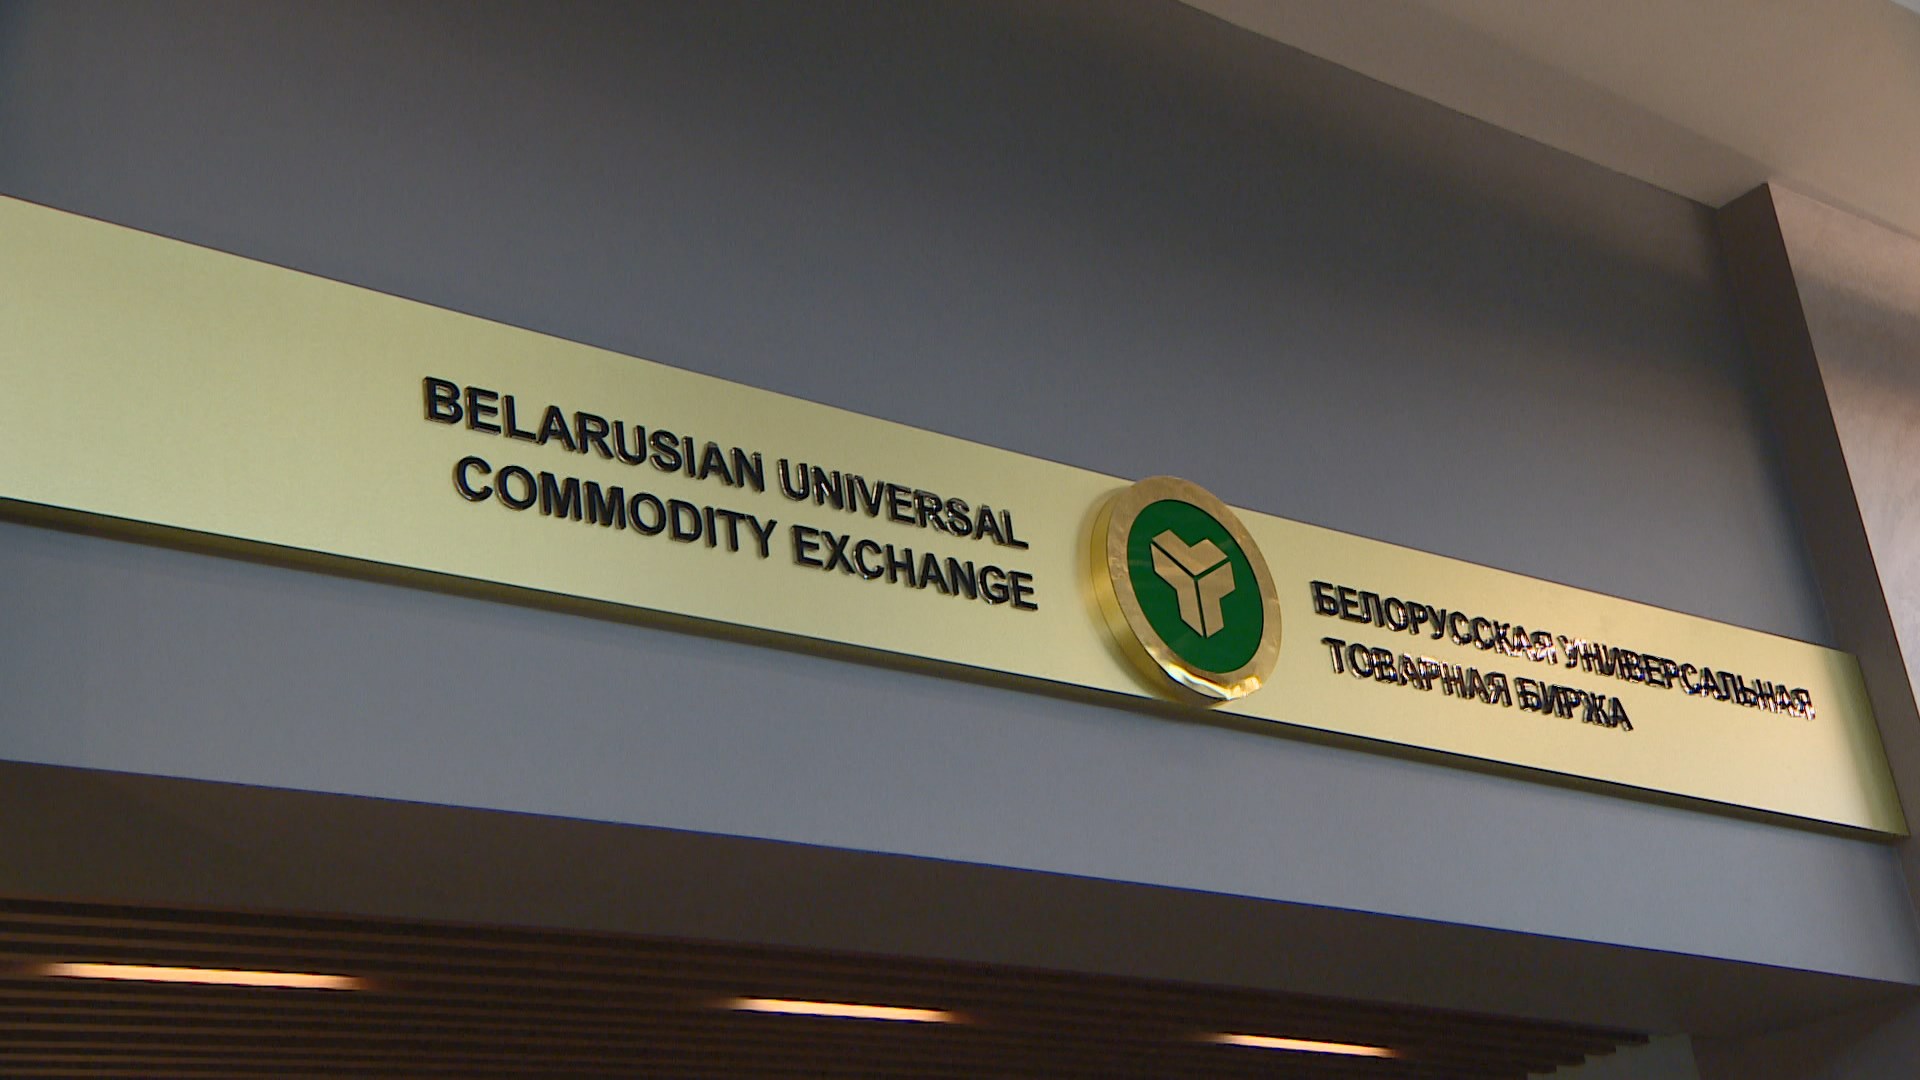 Number of transactions at Belarusian Universal Commodity Exchange increased